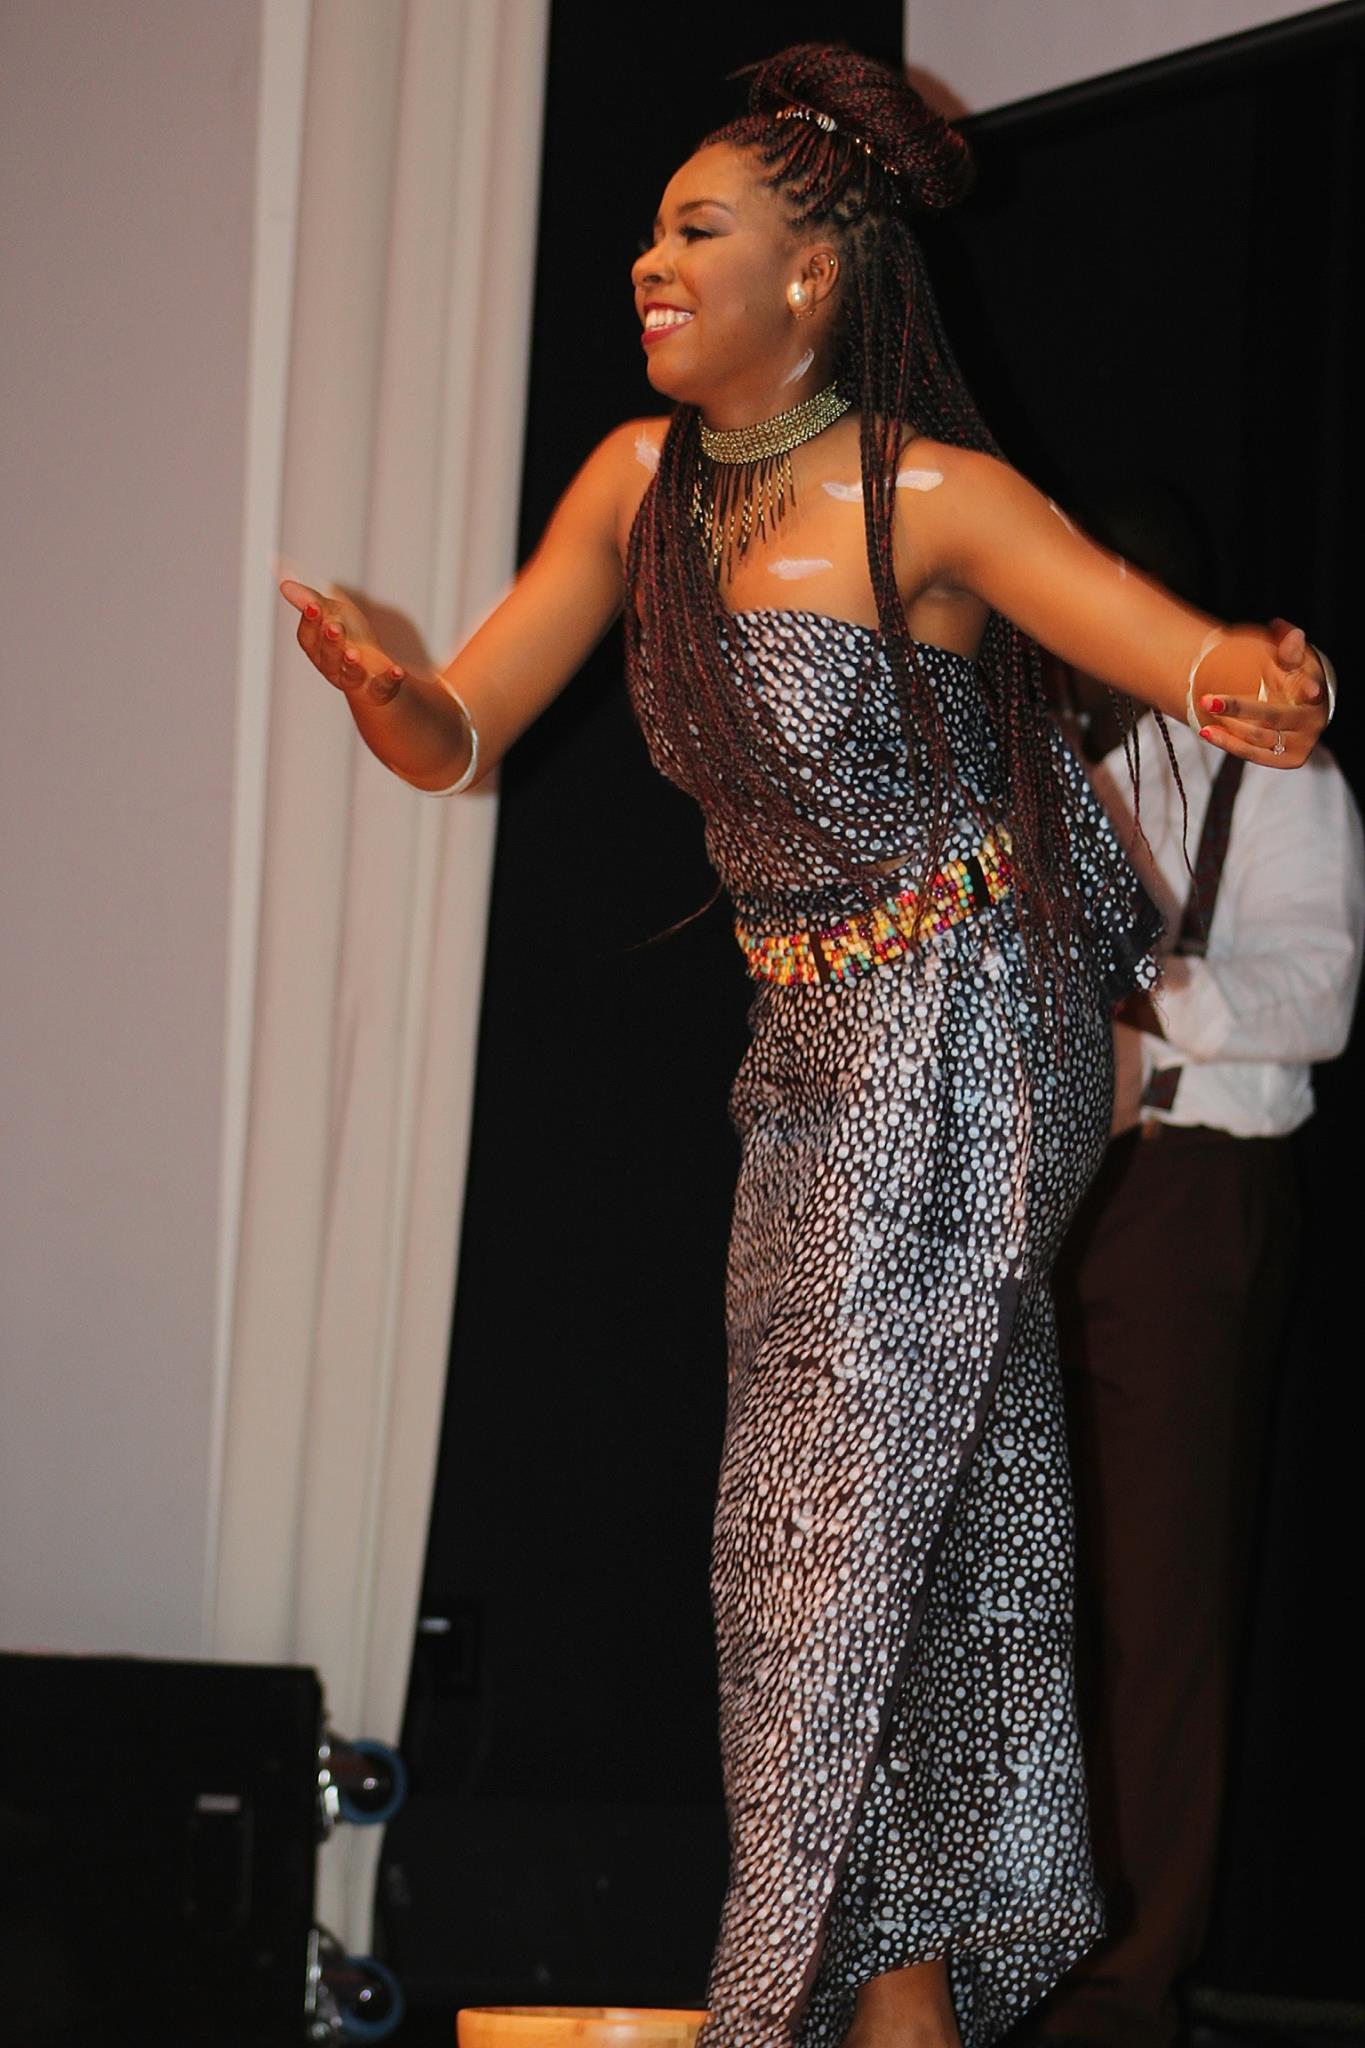 Gala participant walking on stage